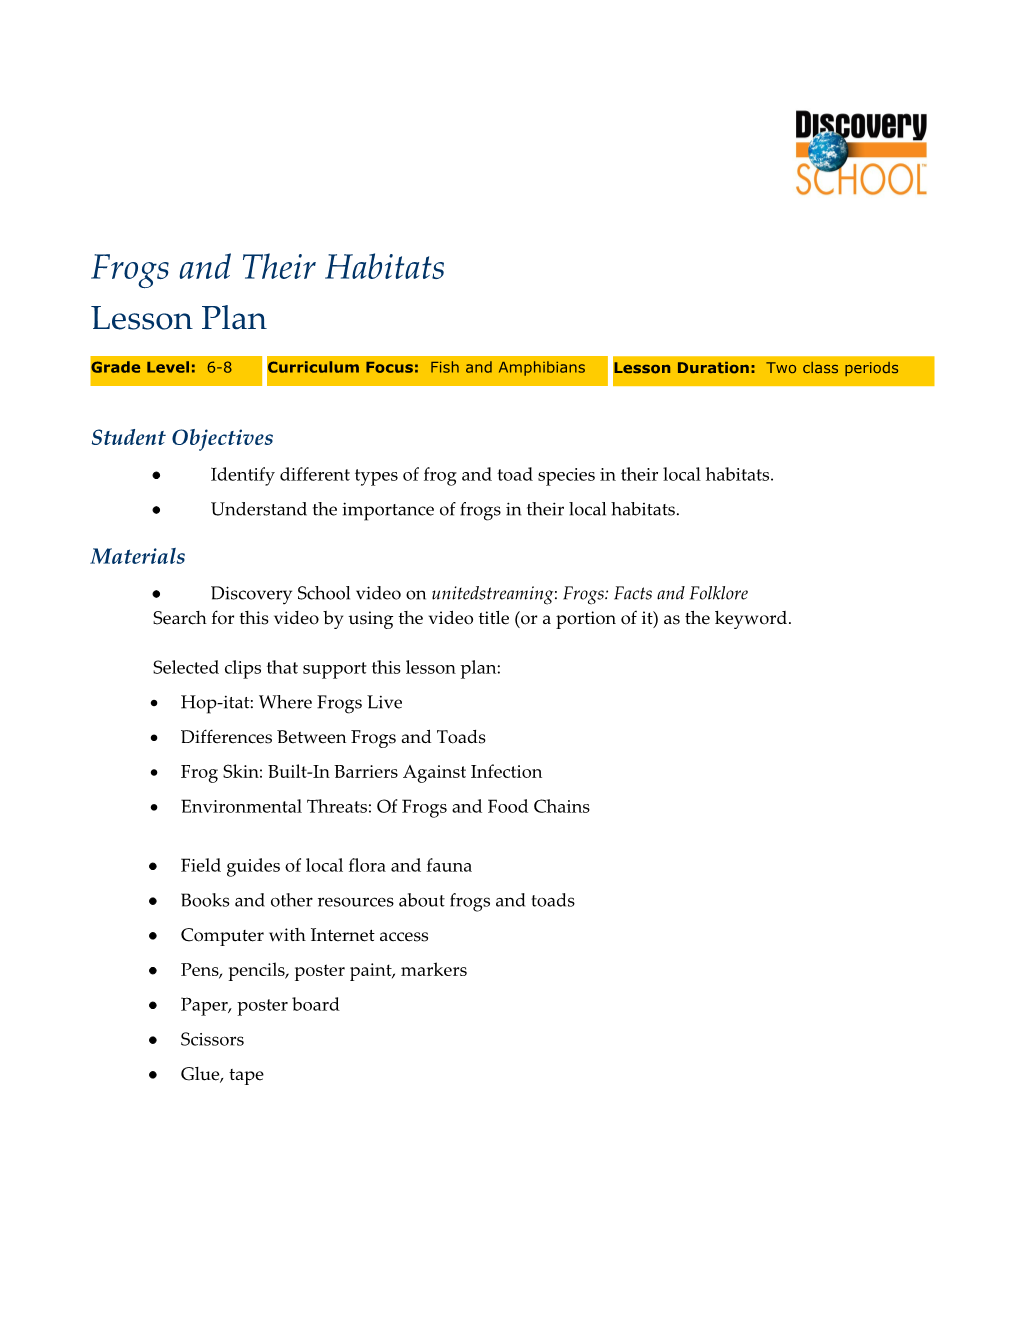 Frogs and Their Habitats